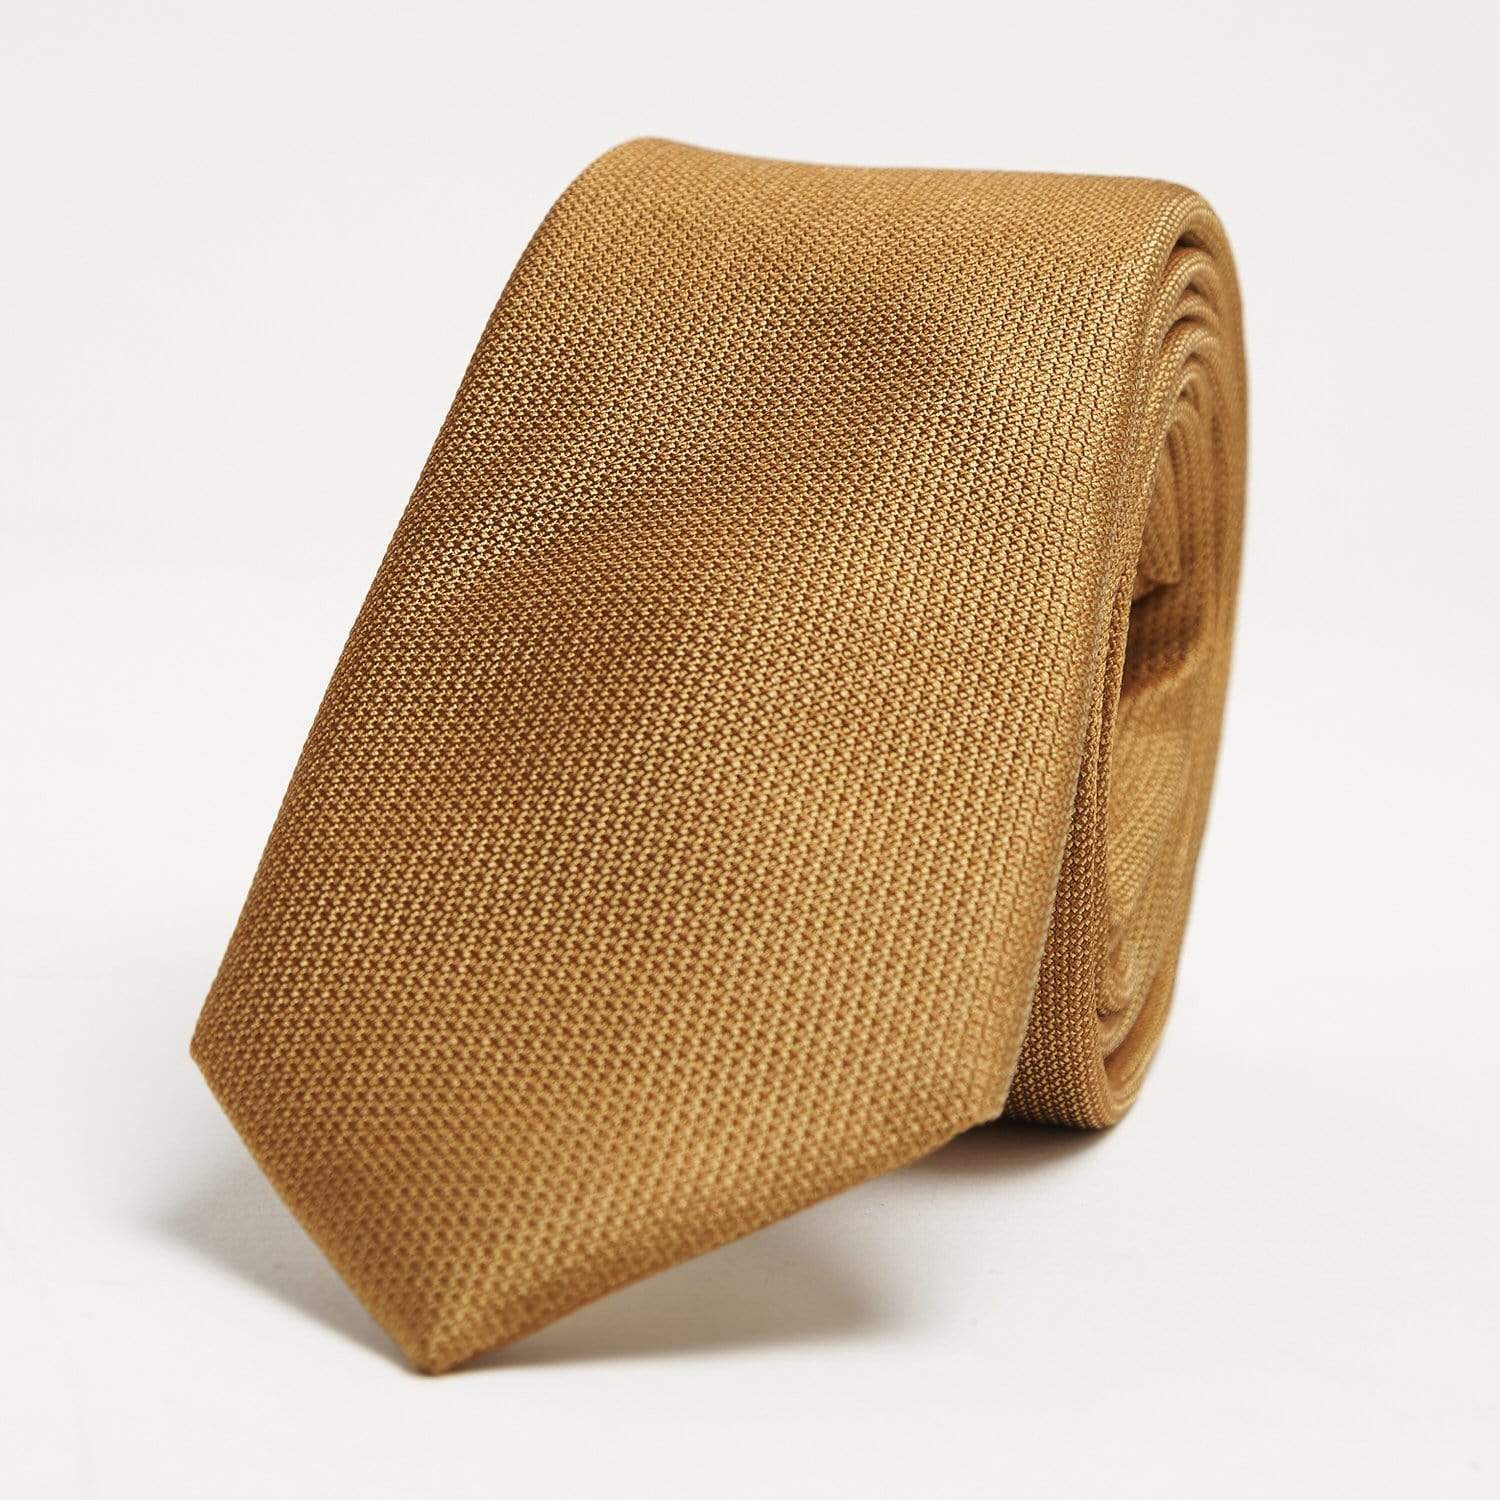 T.M.Lewin-Textured-Plain-Tie-Yellow-and-Mustard-69105-005